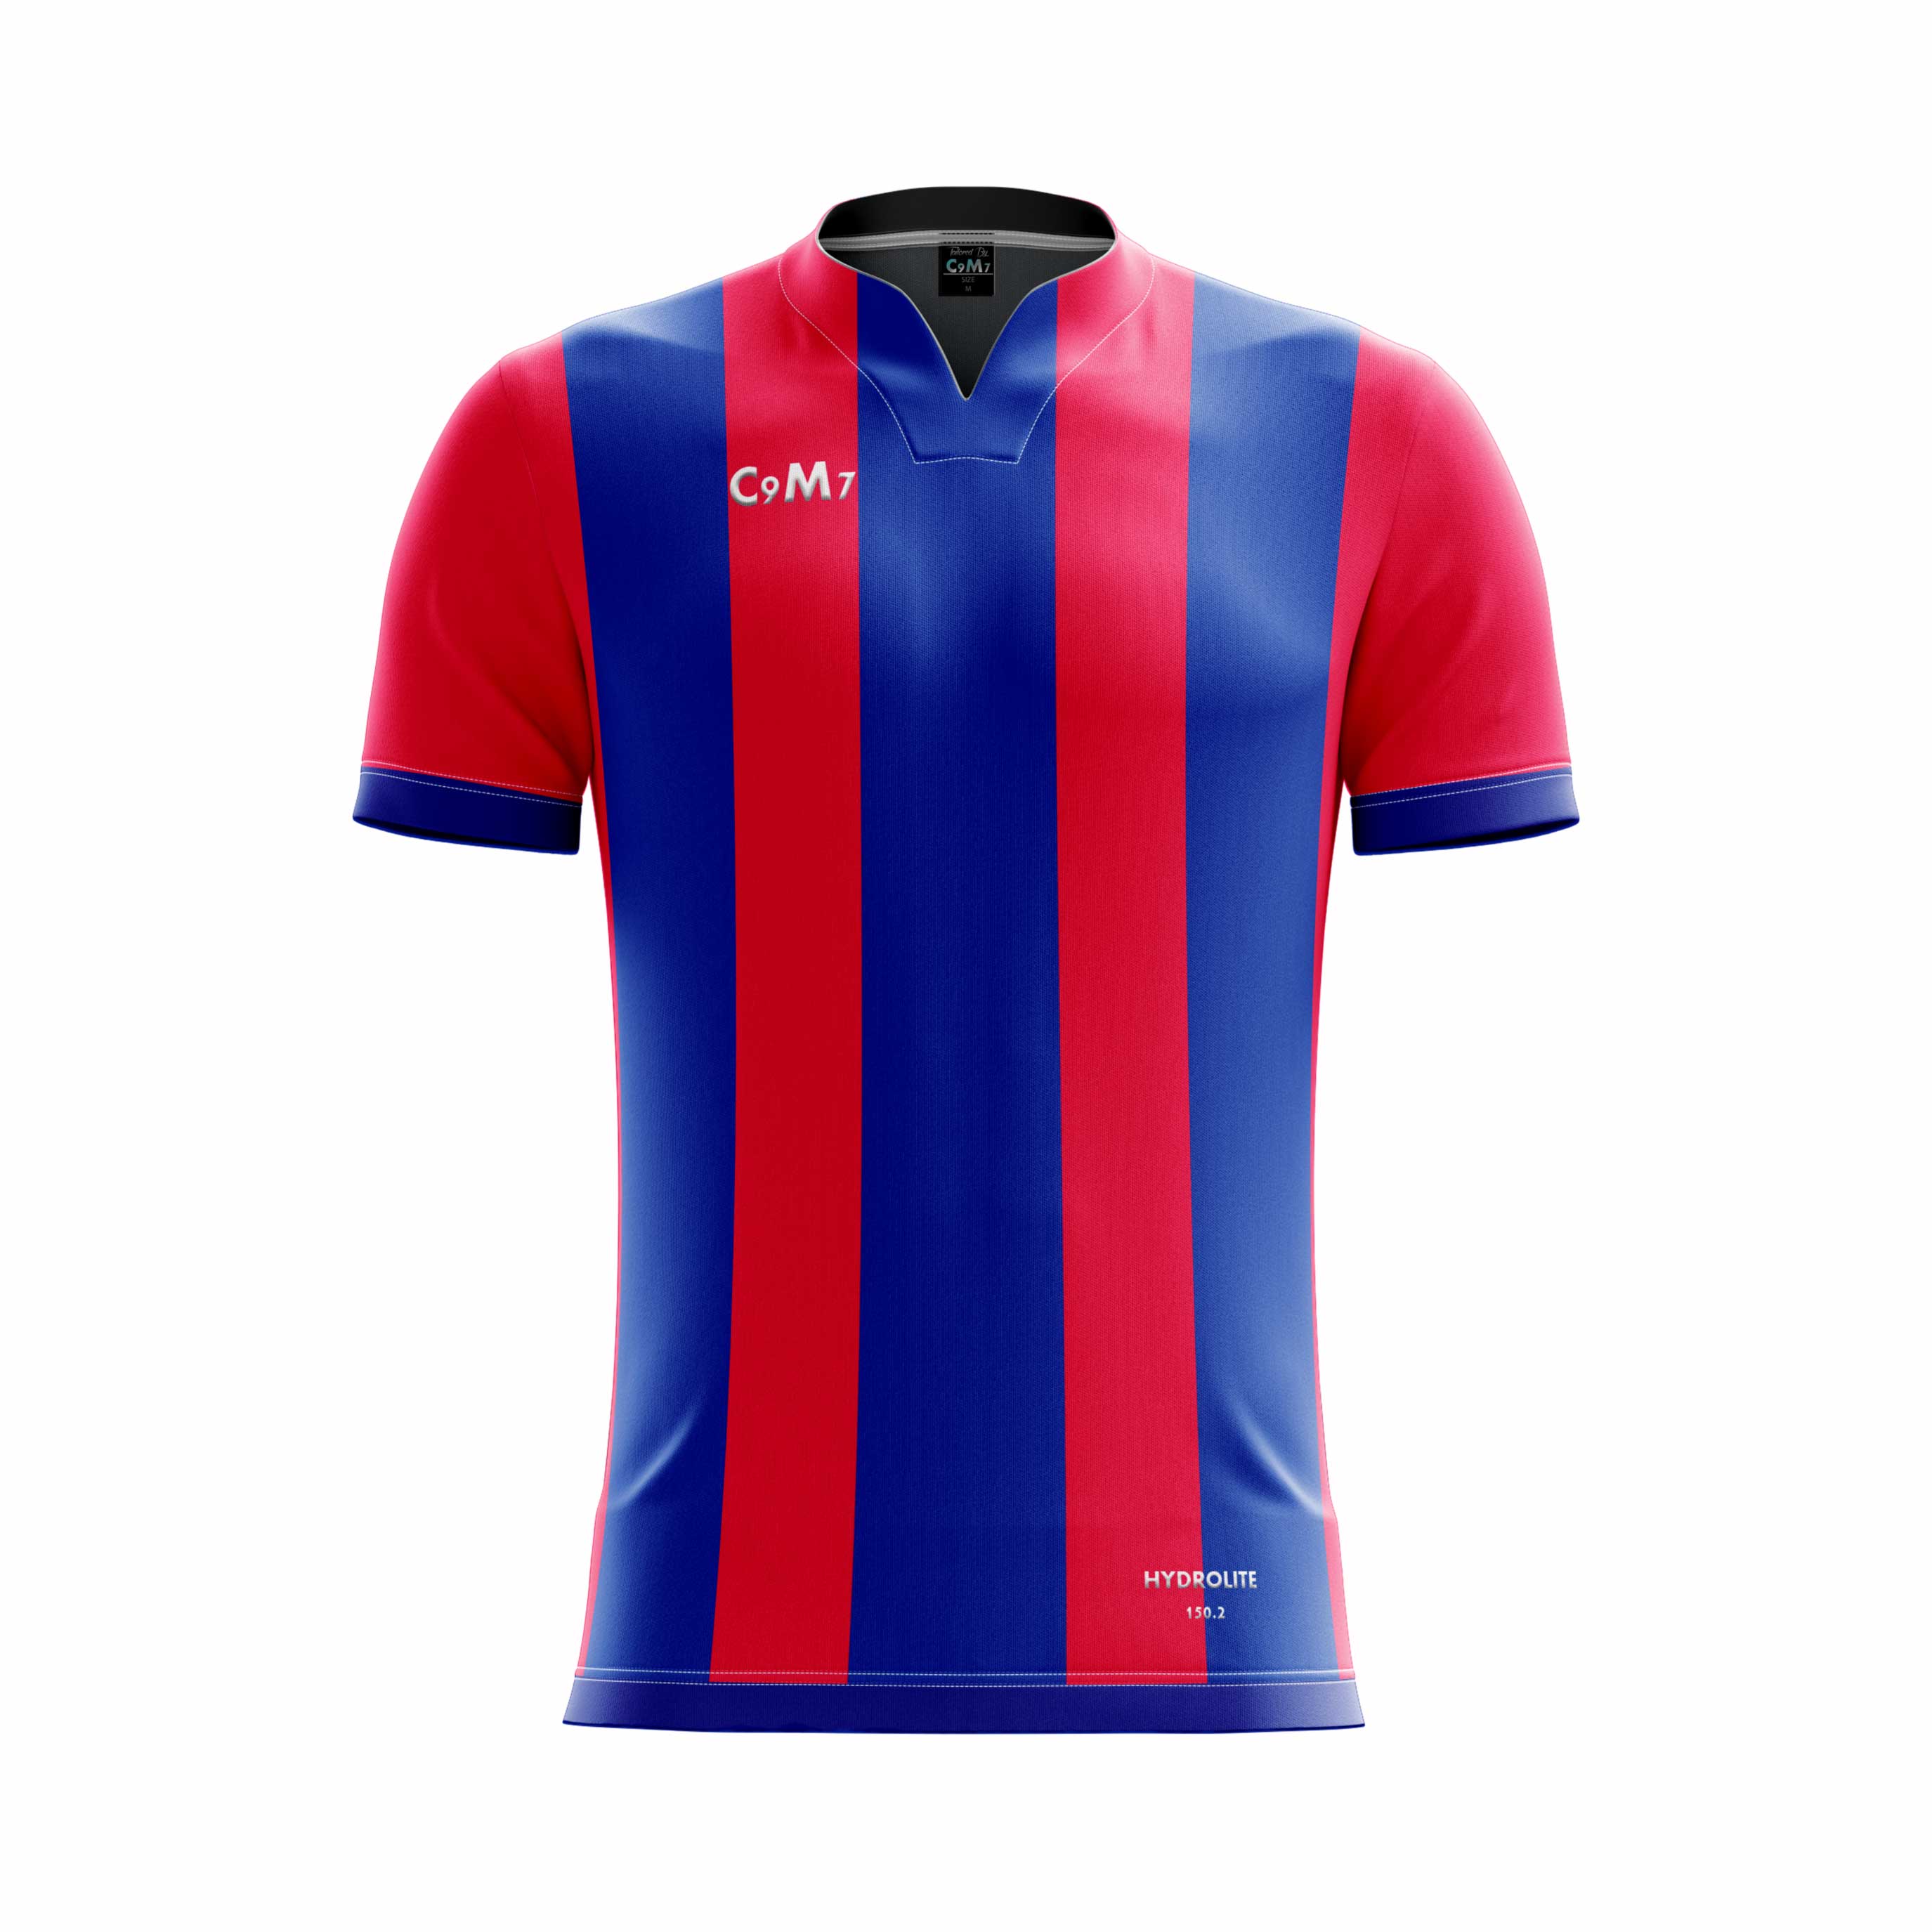 blue and red football jersey